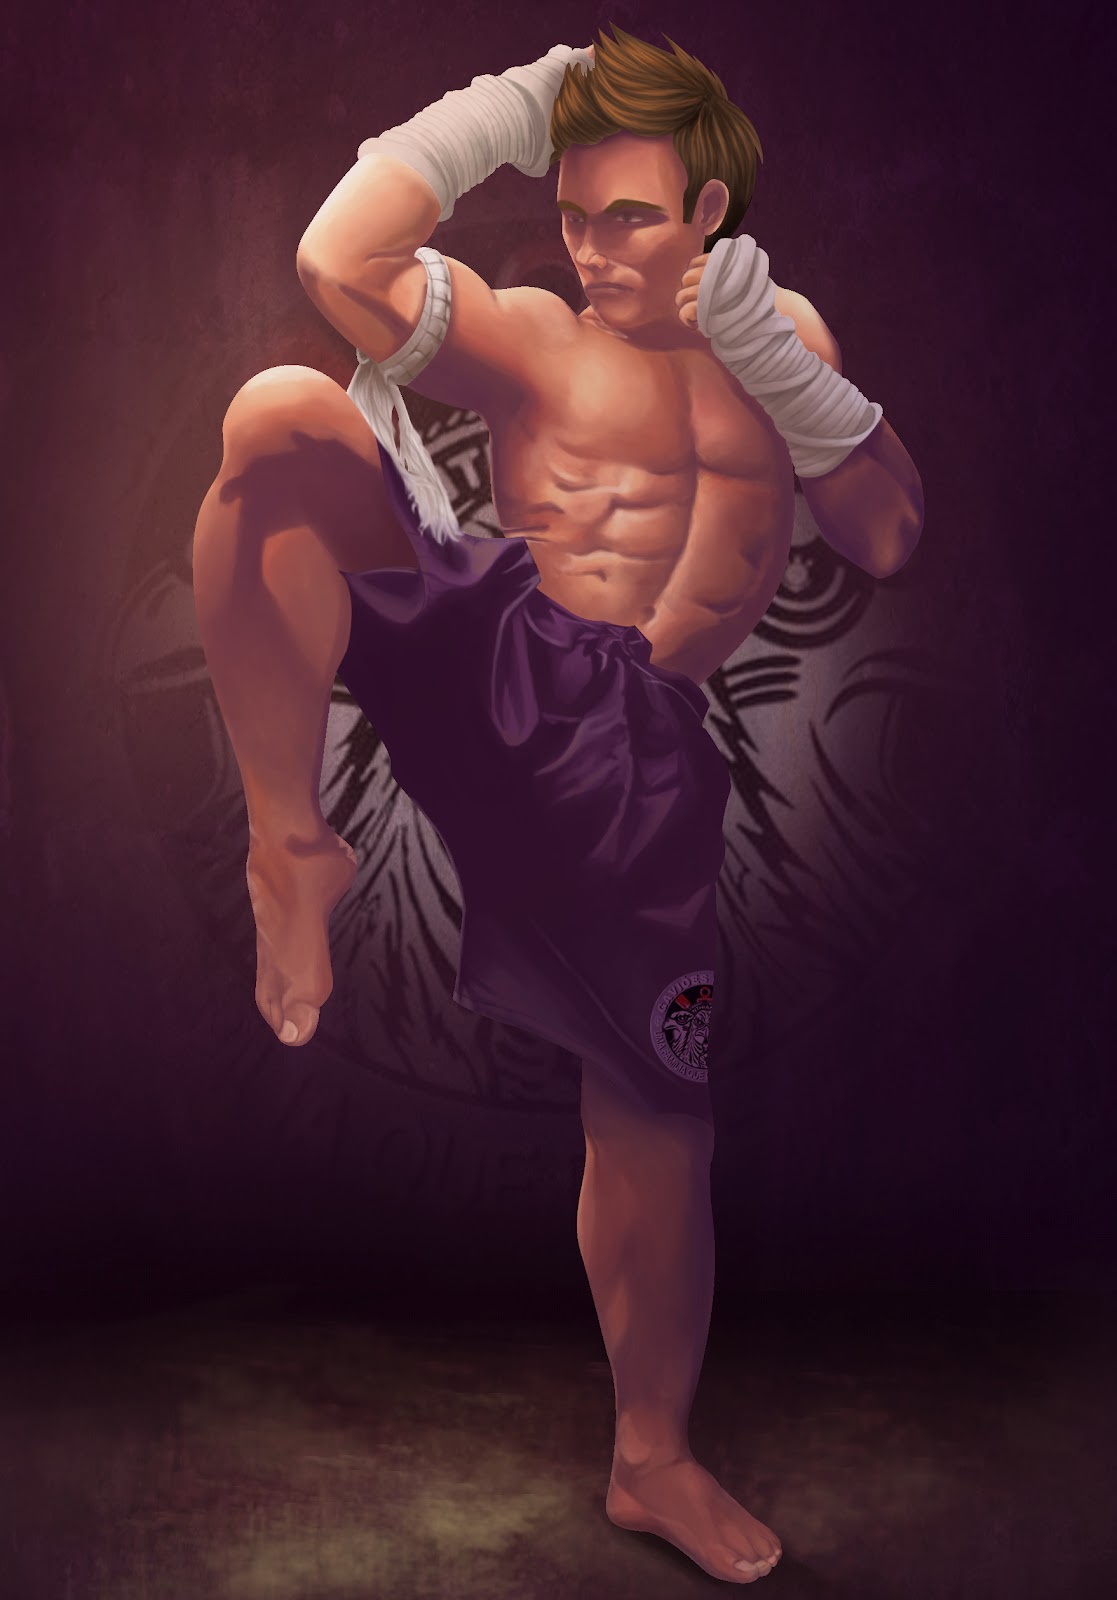 Muay Thai Boxing Wallpaper Art Of Fighting HD Picture